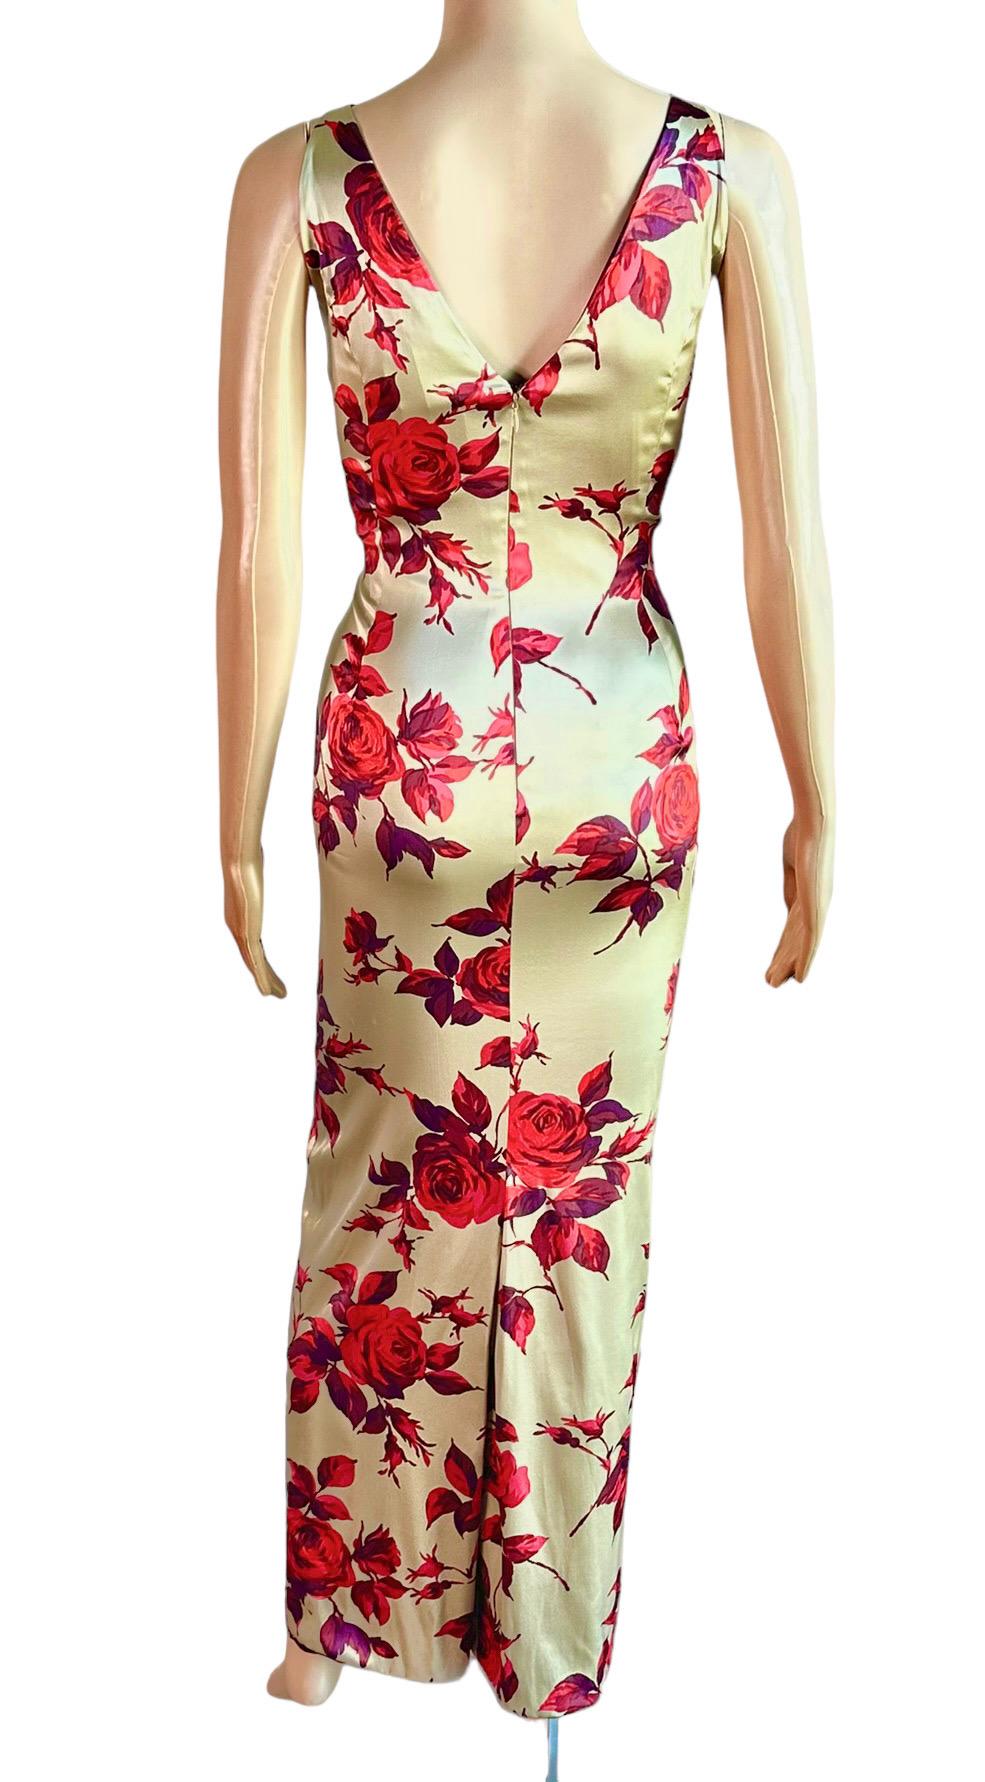 Dolce & Gabbana 1990's Vintage Unworn Silk Floral Rose Print Evening Dress Gown In New Condition For Sale In Naples, FL